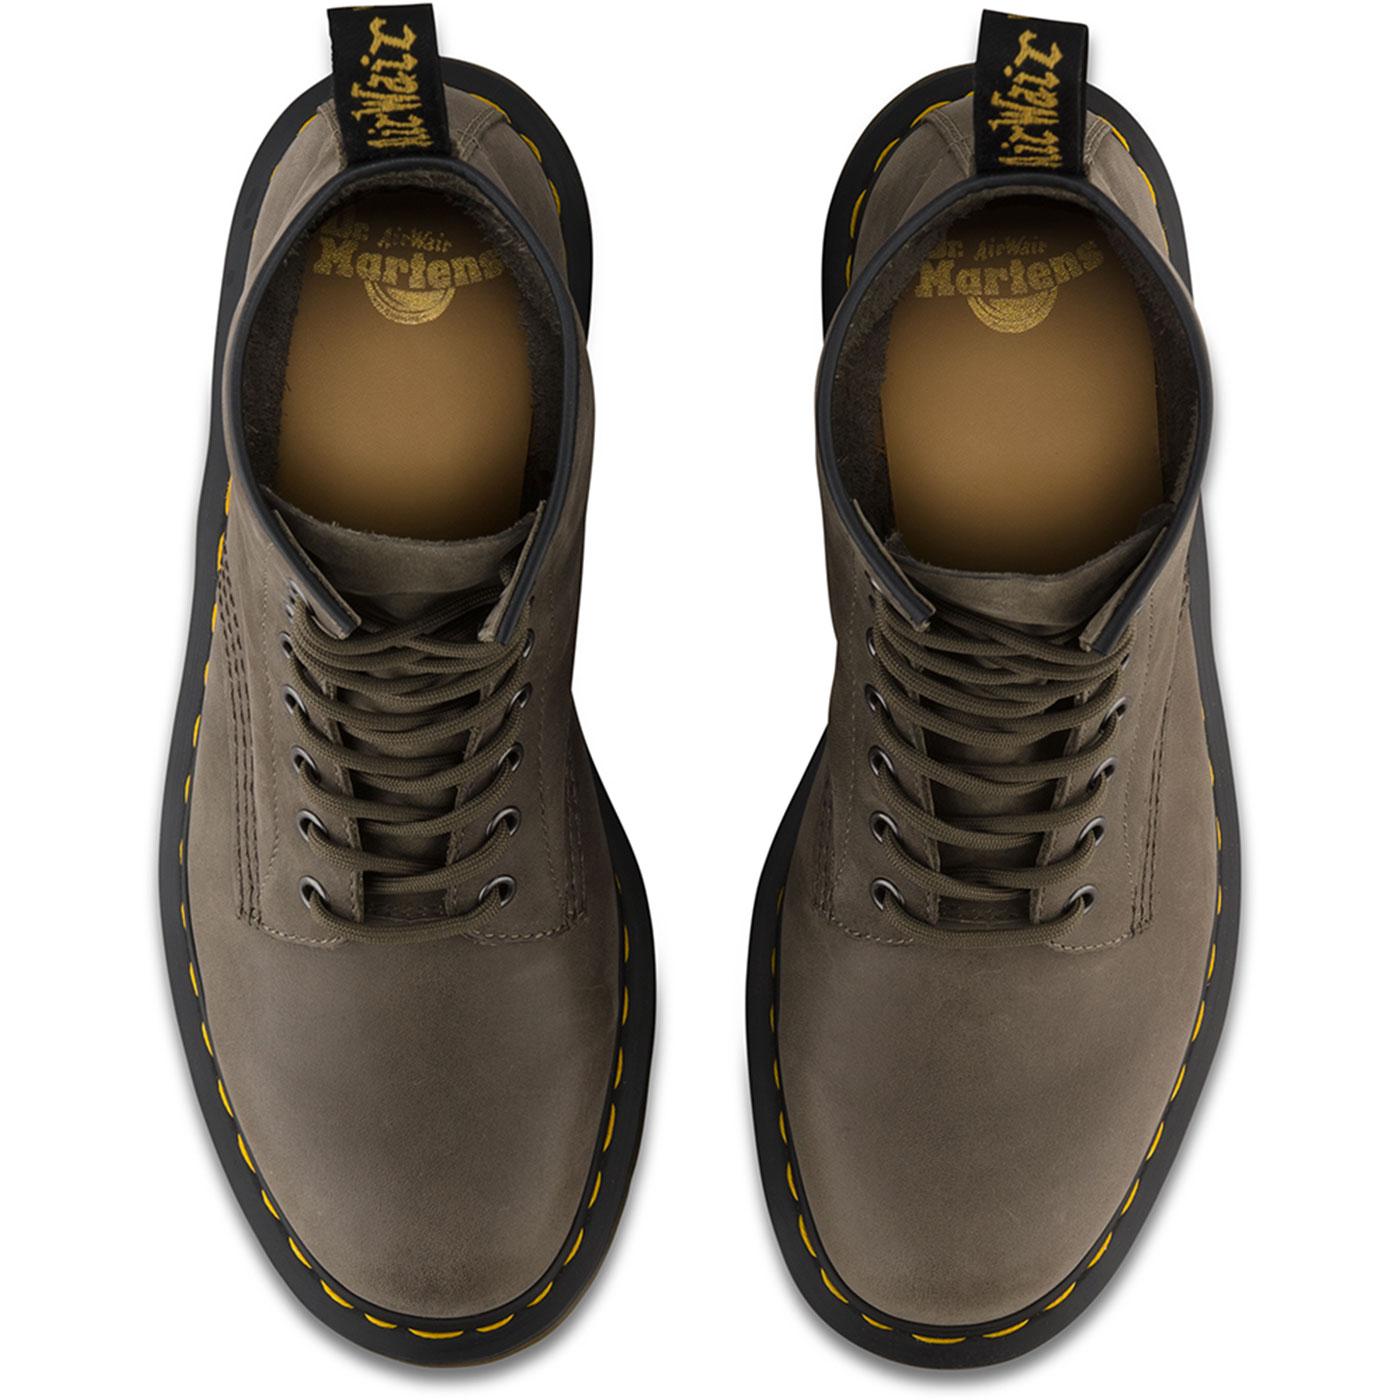 Leonardoda Systematically Manners DR MARTENS Men's Retro 1460 Boots in Dusky Olive